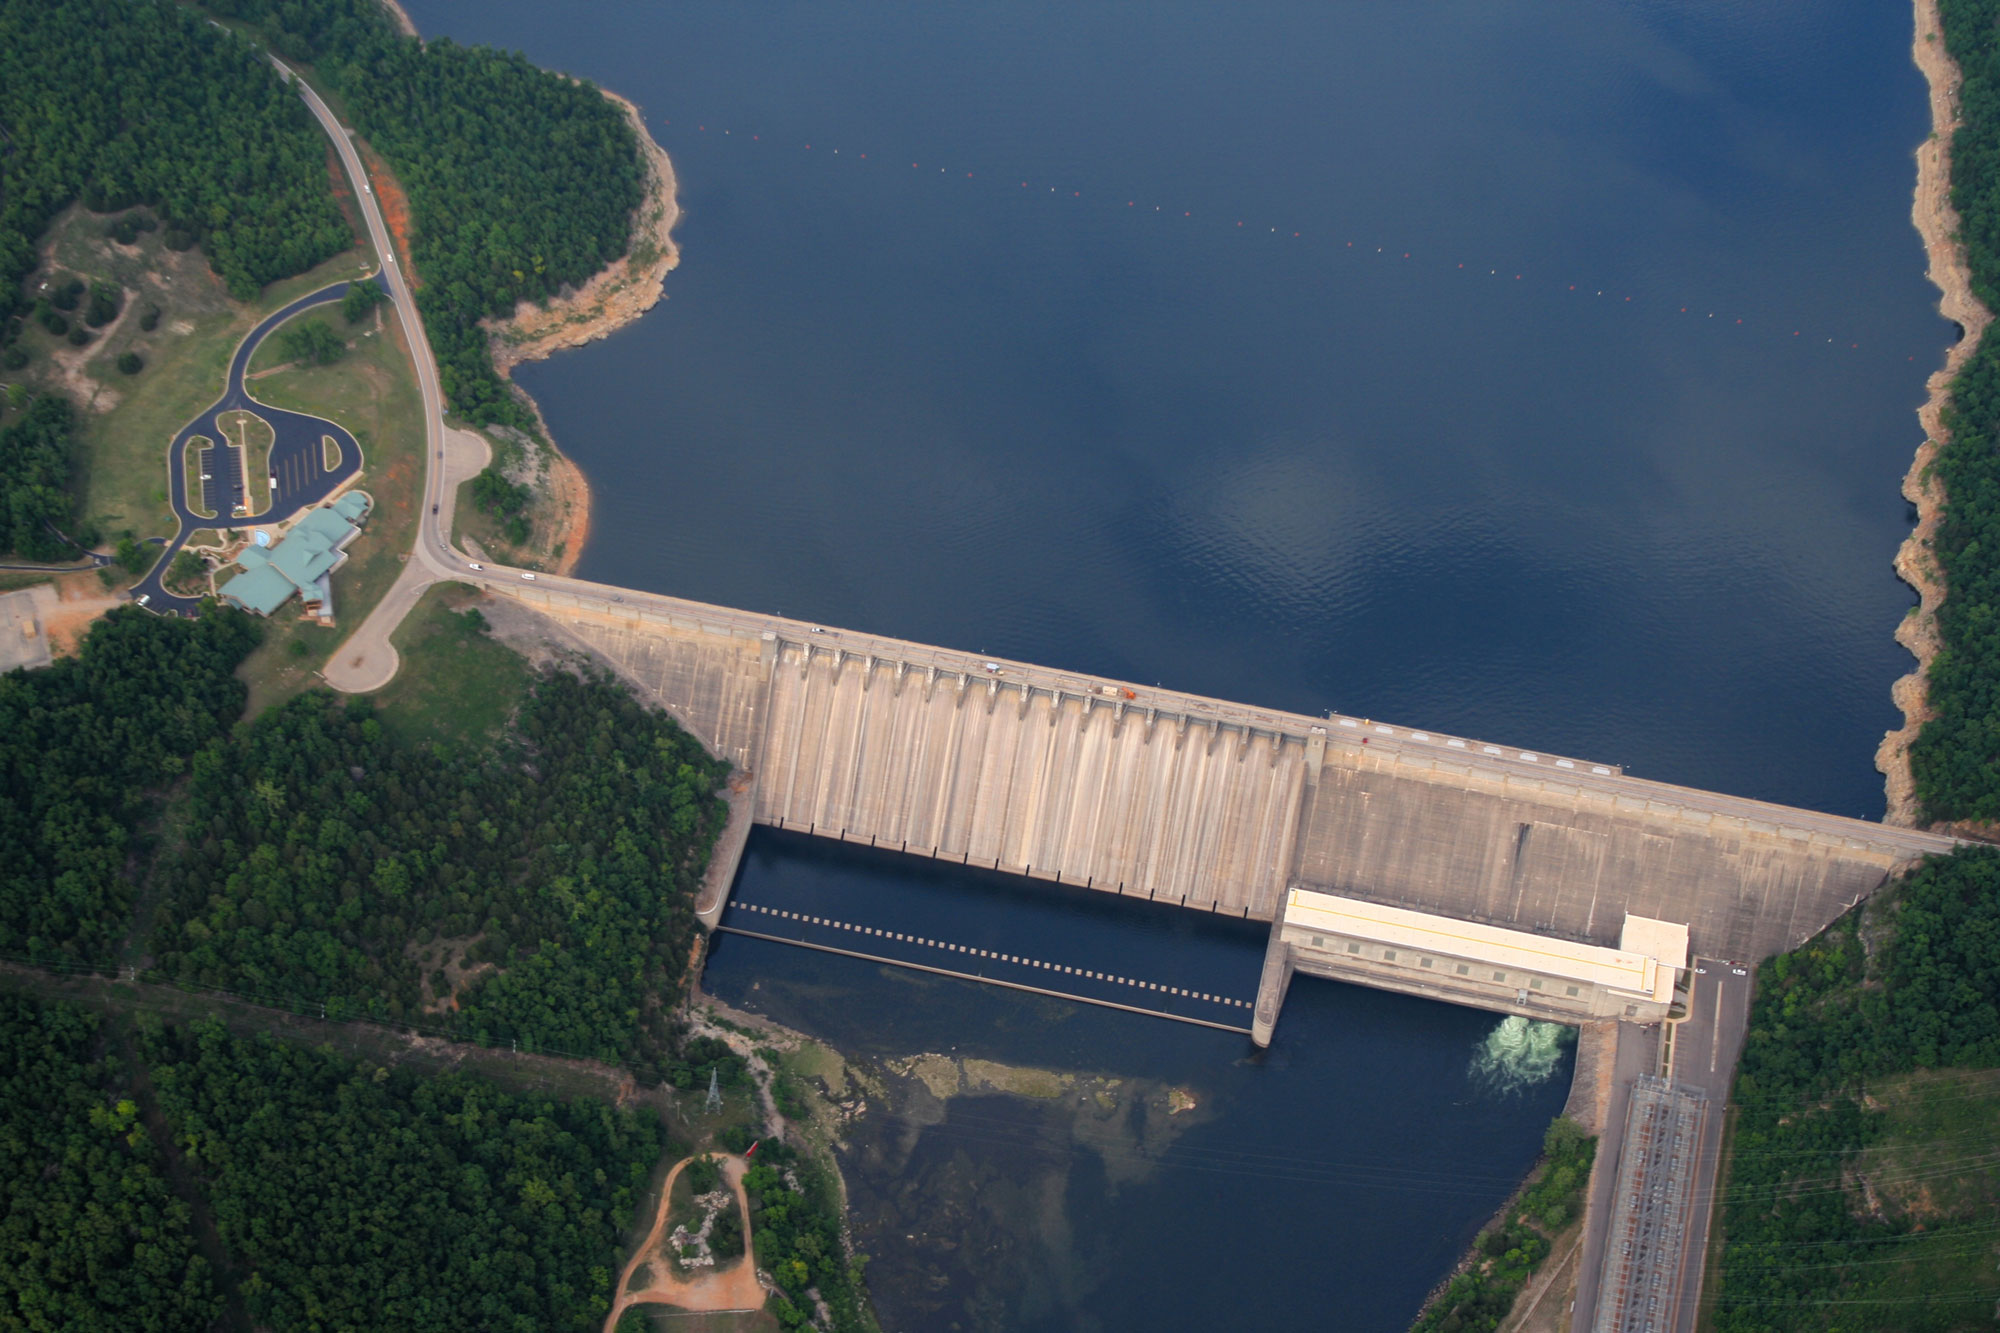 Aerial photograph of Bull Shoals hydroelectric dam on the White River in Arkansas. The photo shows a concrete dam holding back water on a river.